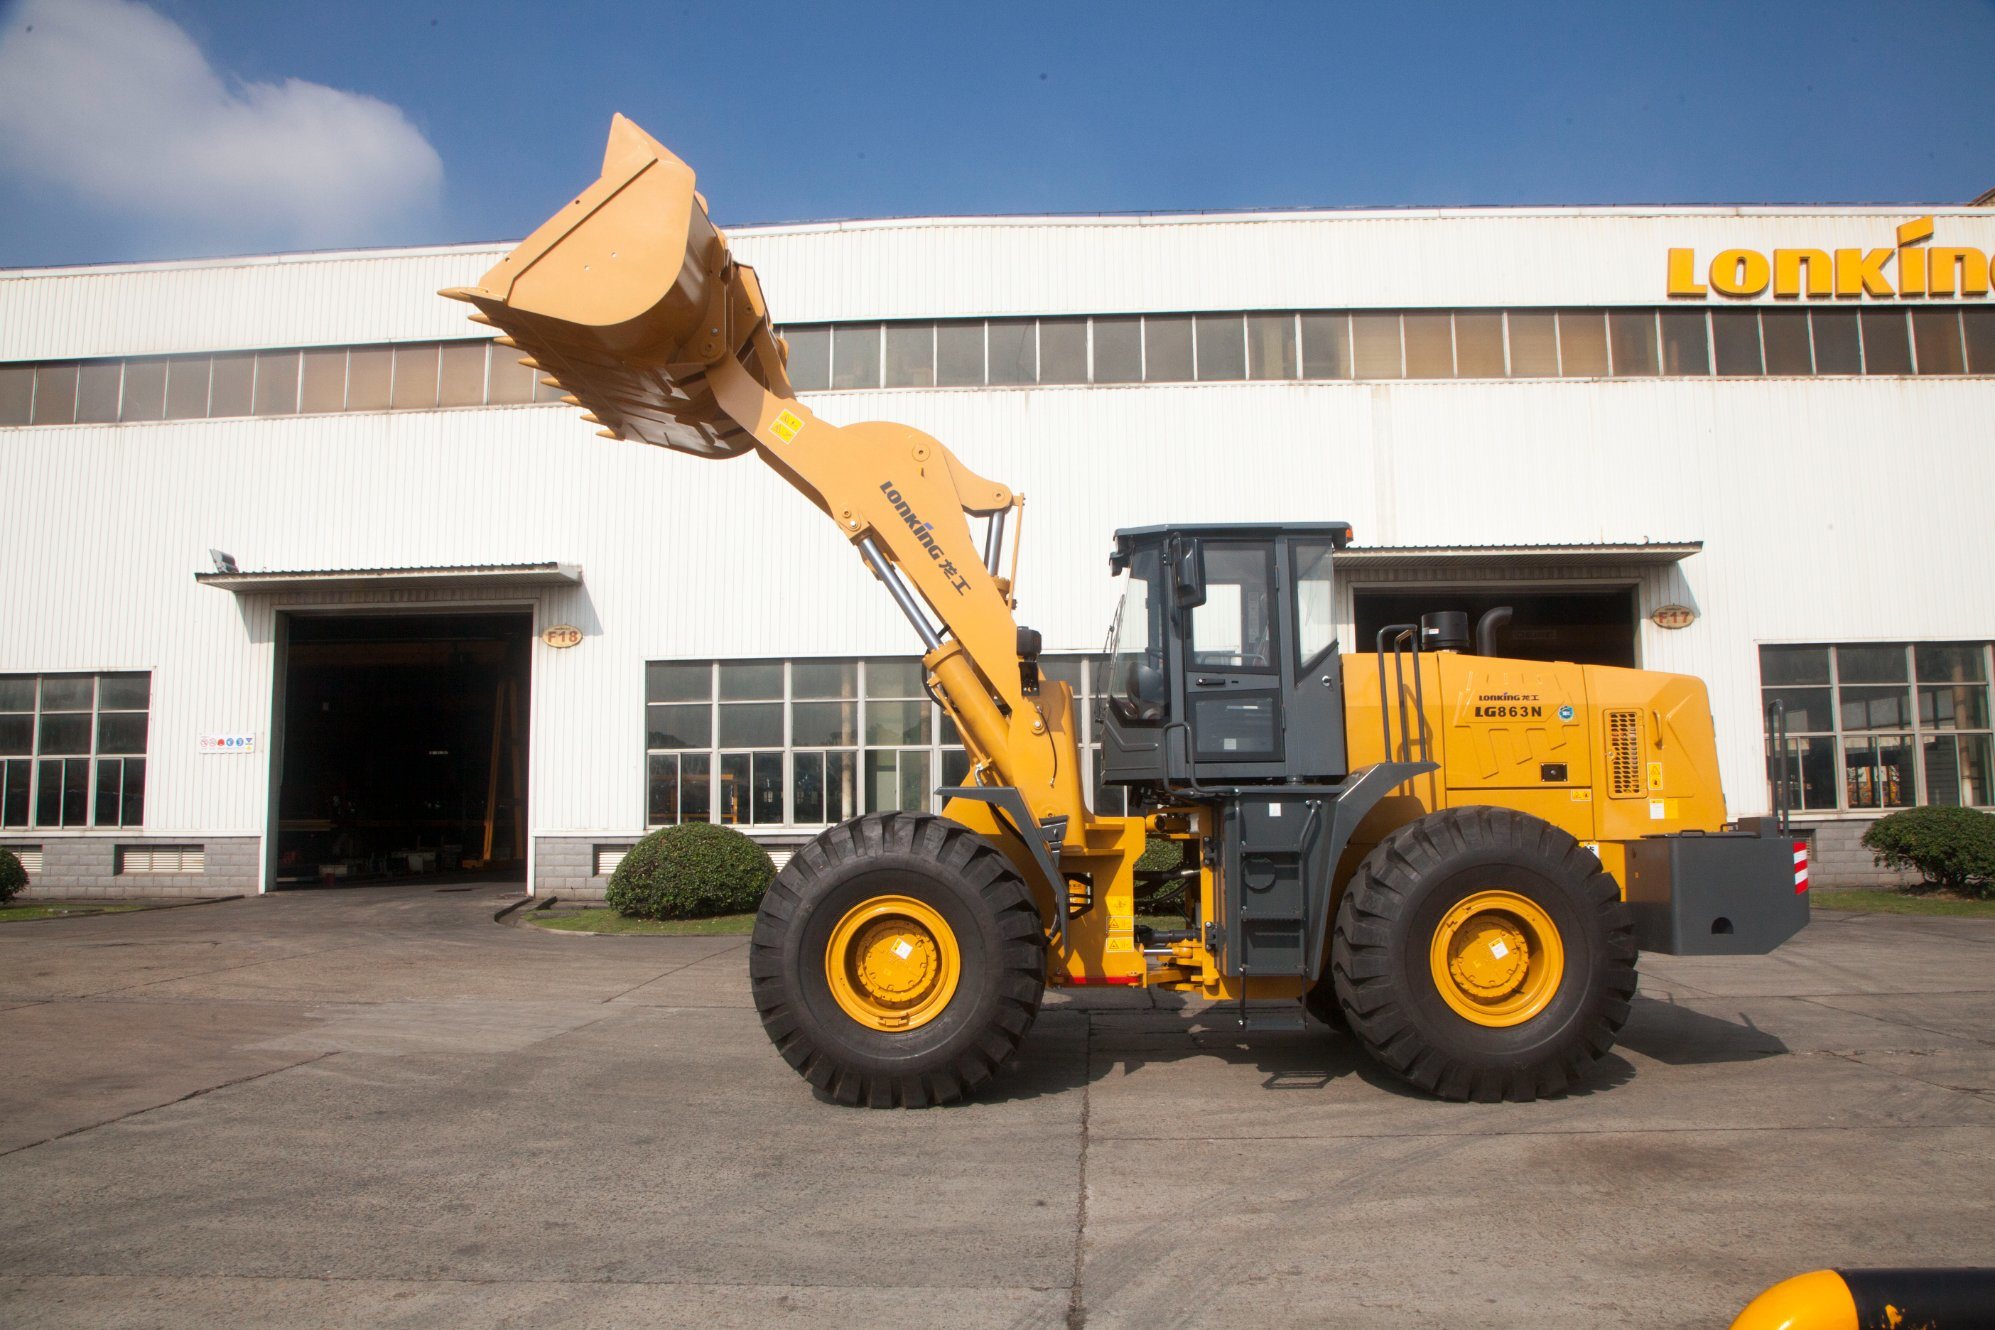 Lonking 6.5 Ton Wheel Loader LG863n in Stock for Promotion